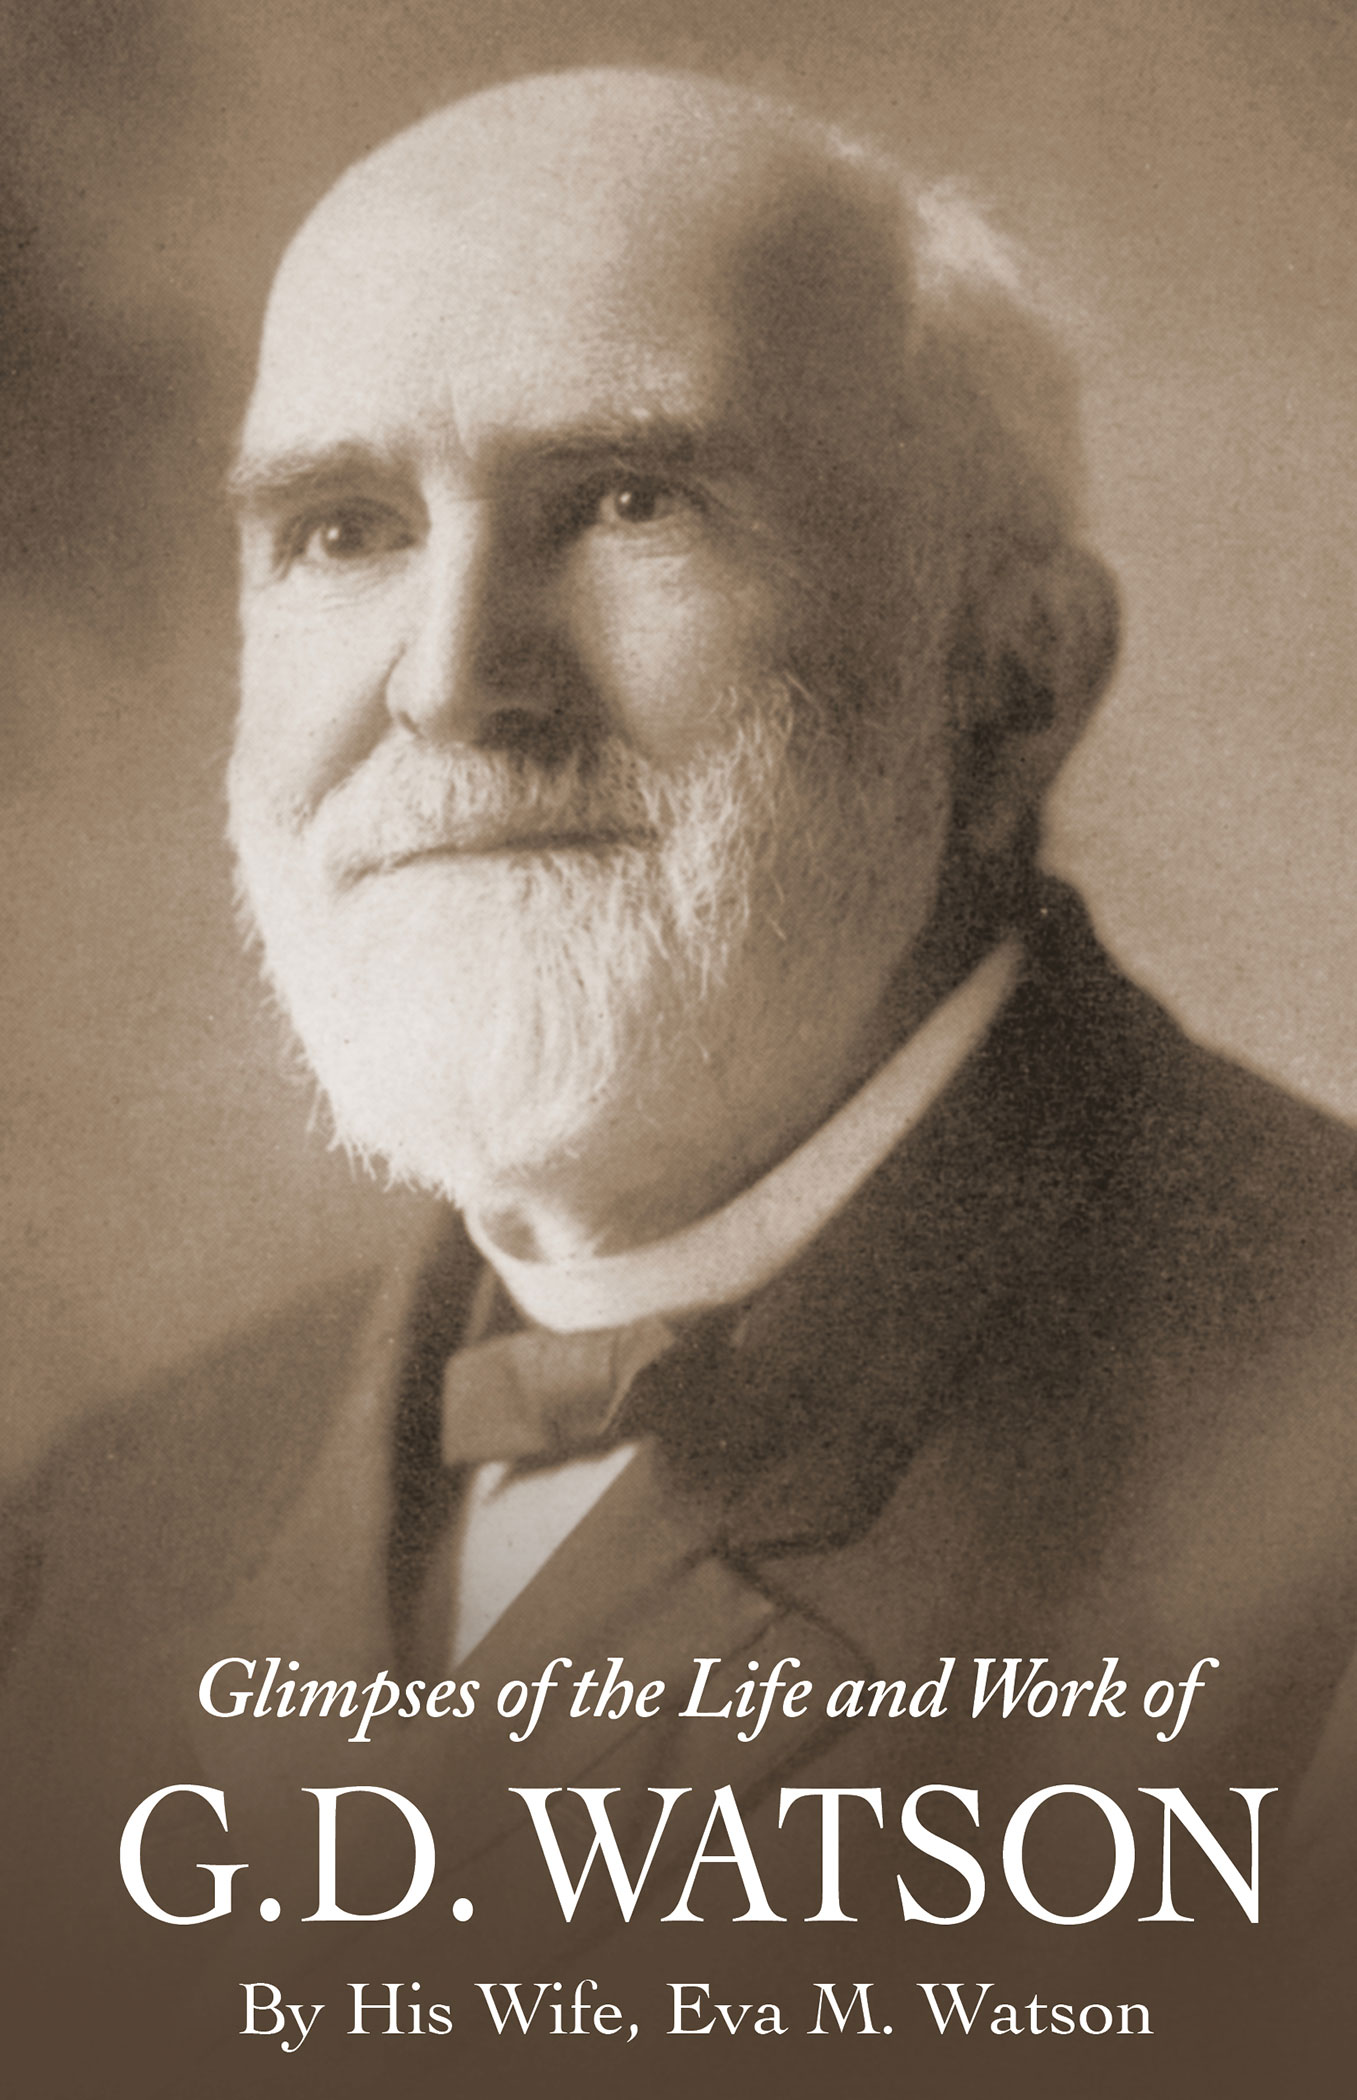 You are currently viewing New Publication: Biography of G. D. Watson by His Wife